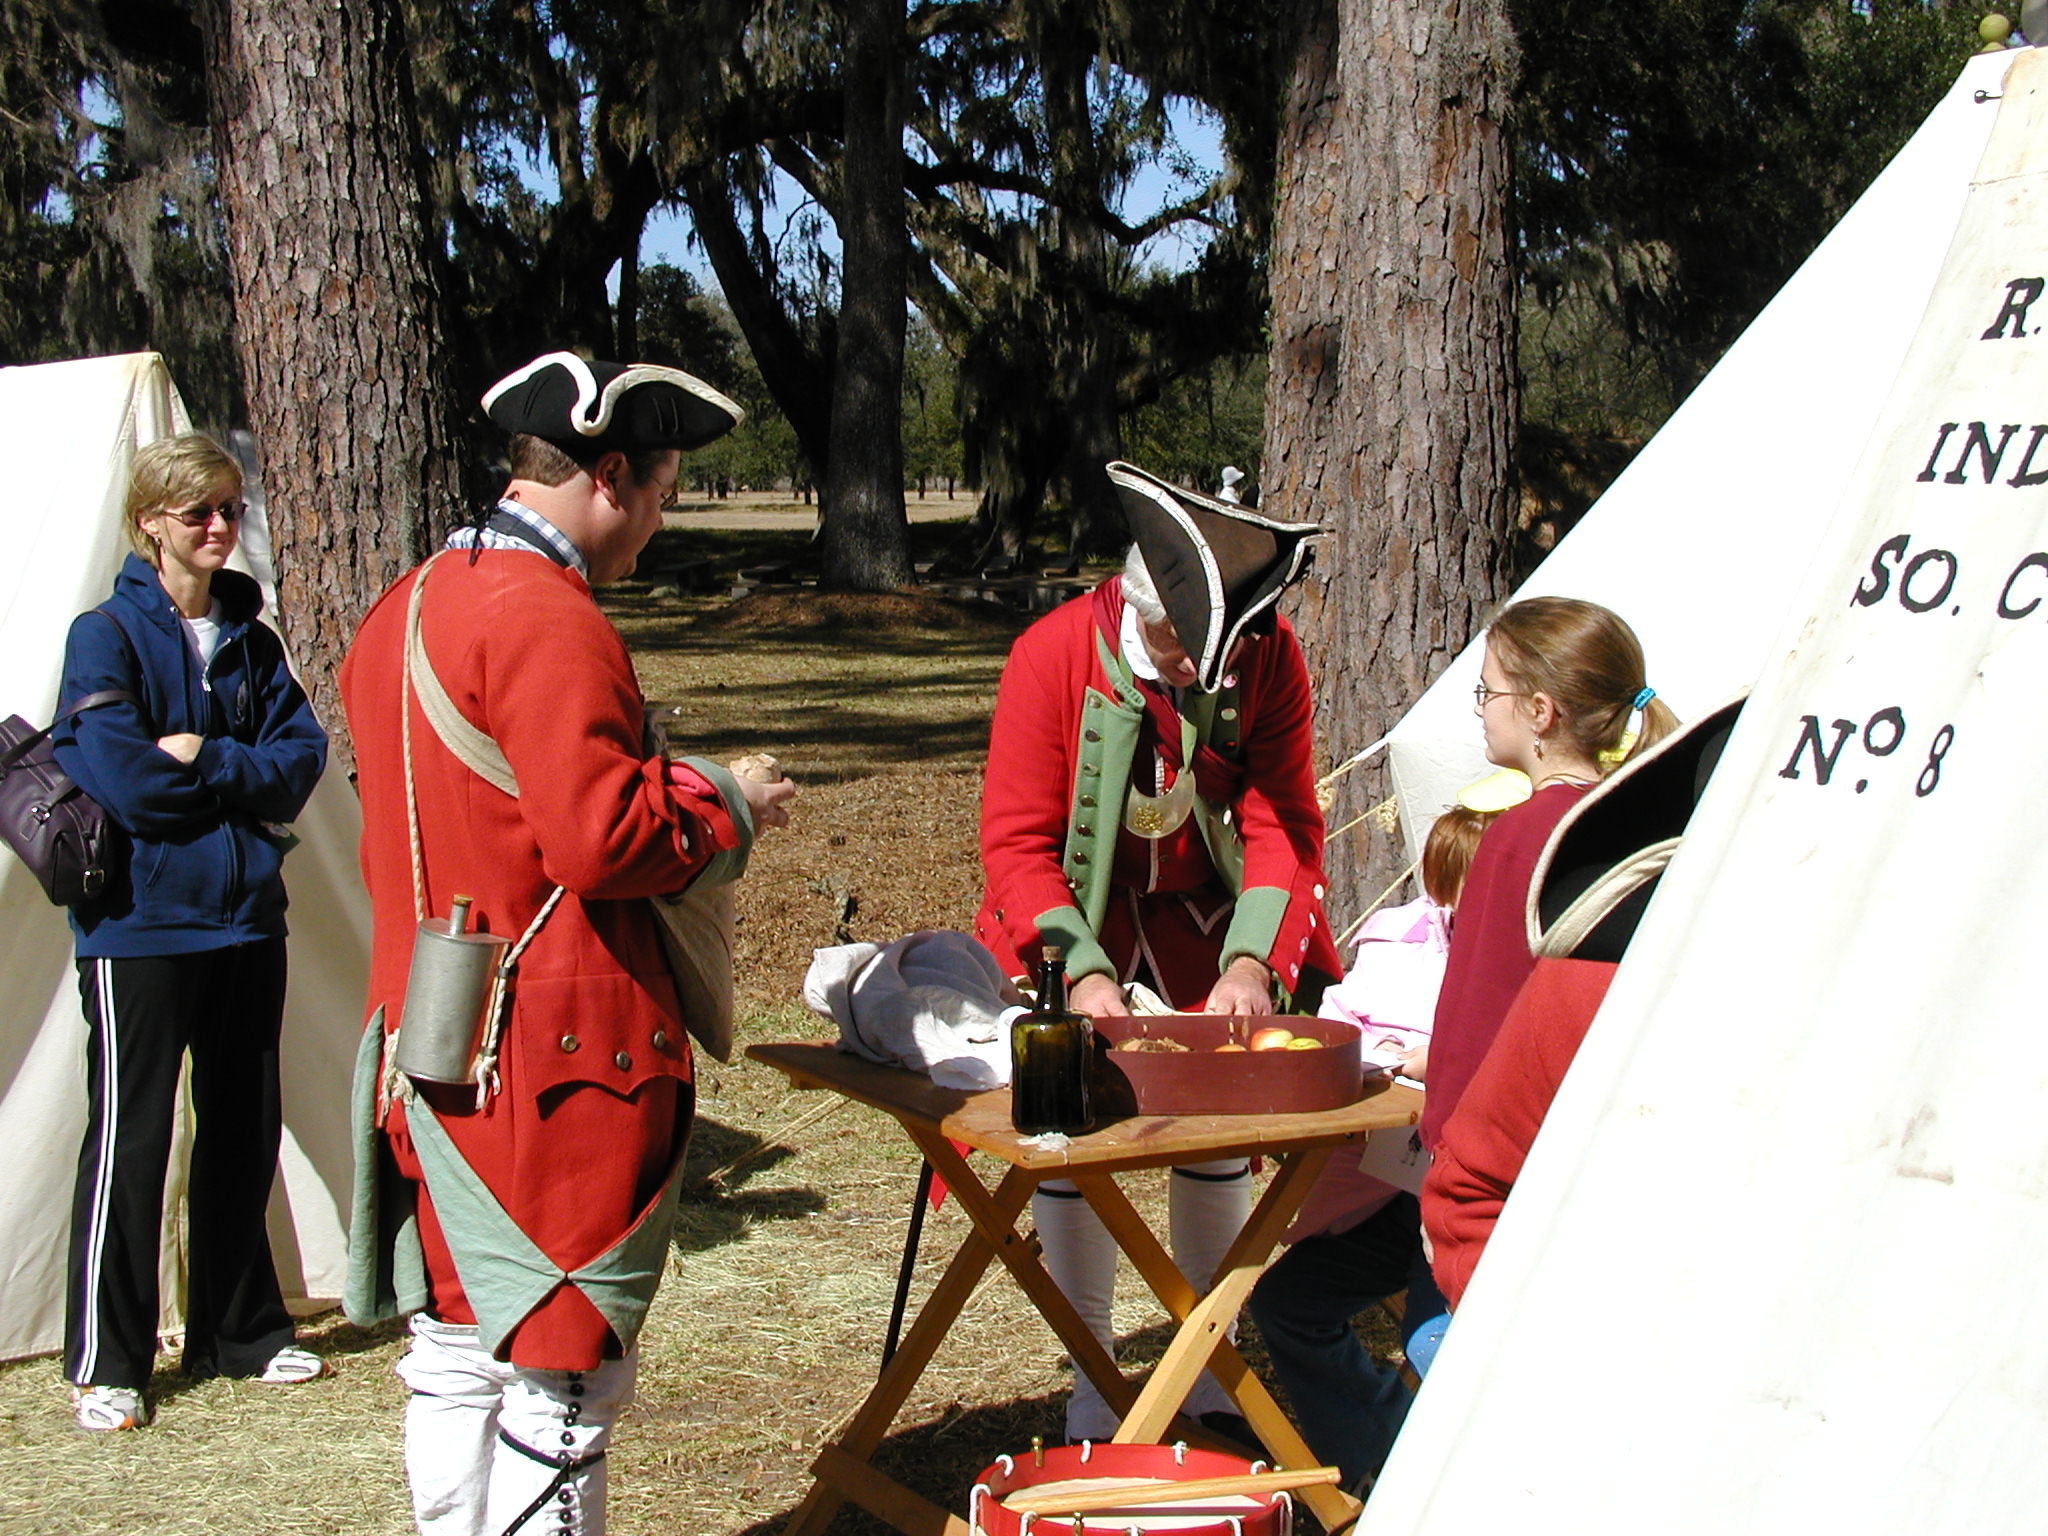 Reenactors performing as the original redcoats who served at Frederica